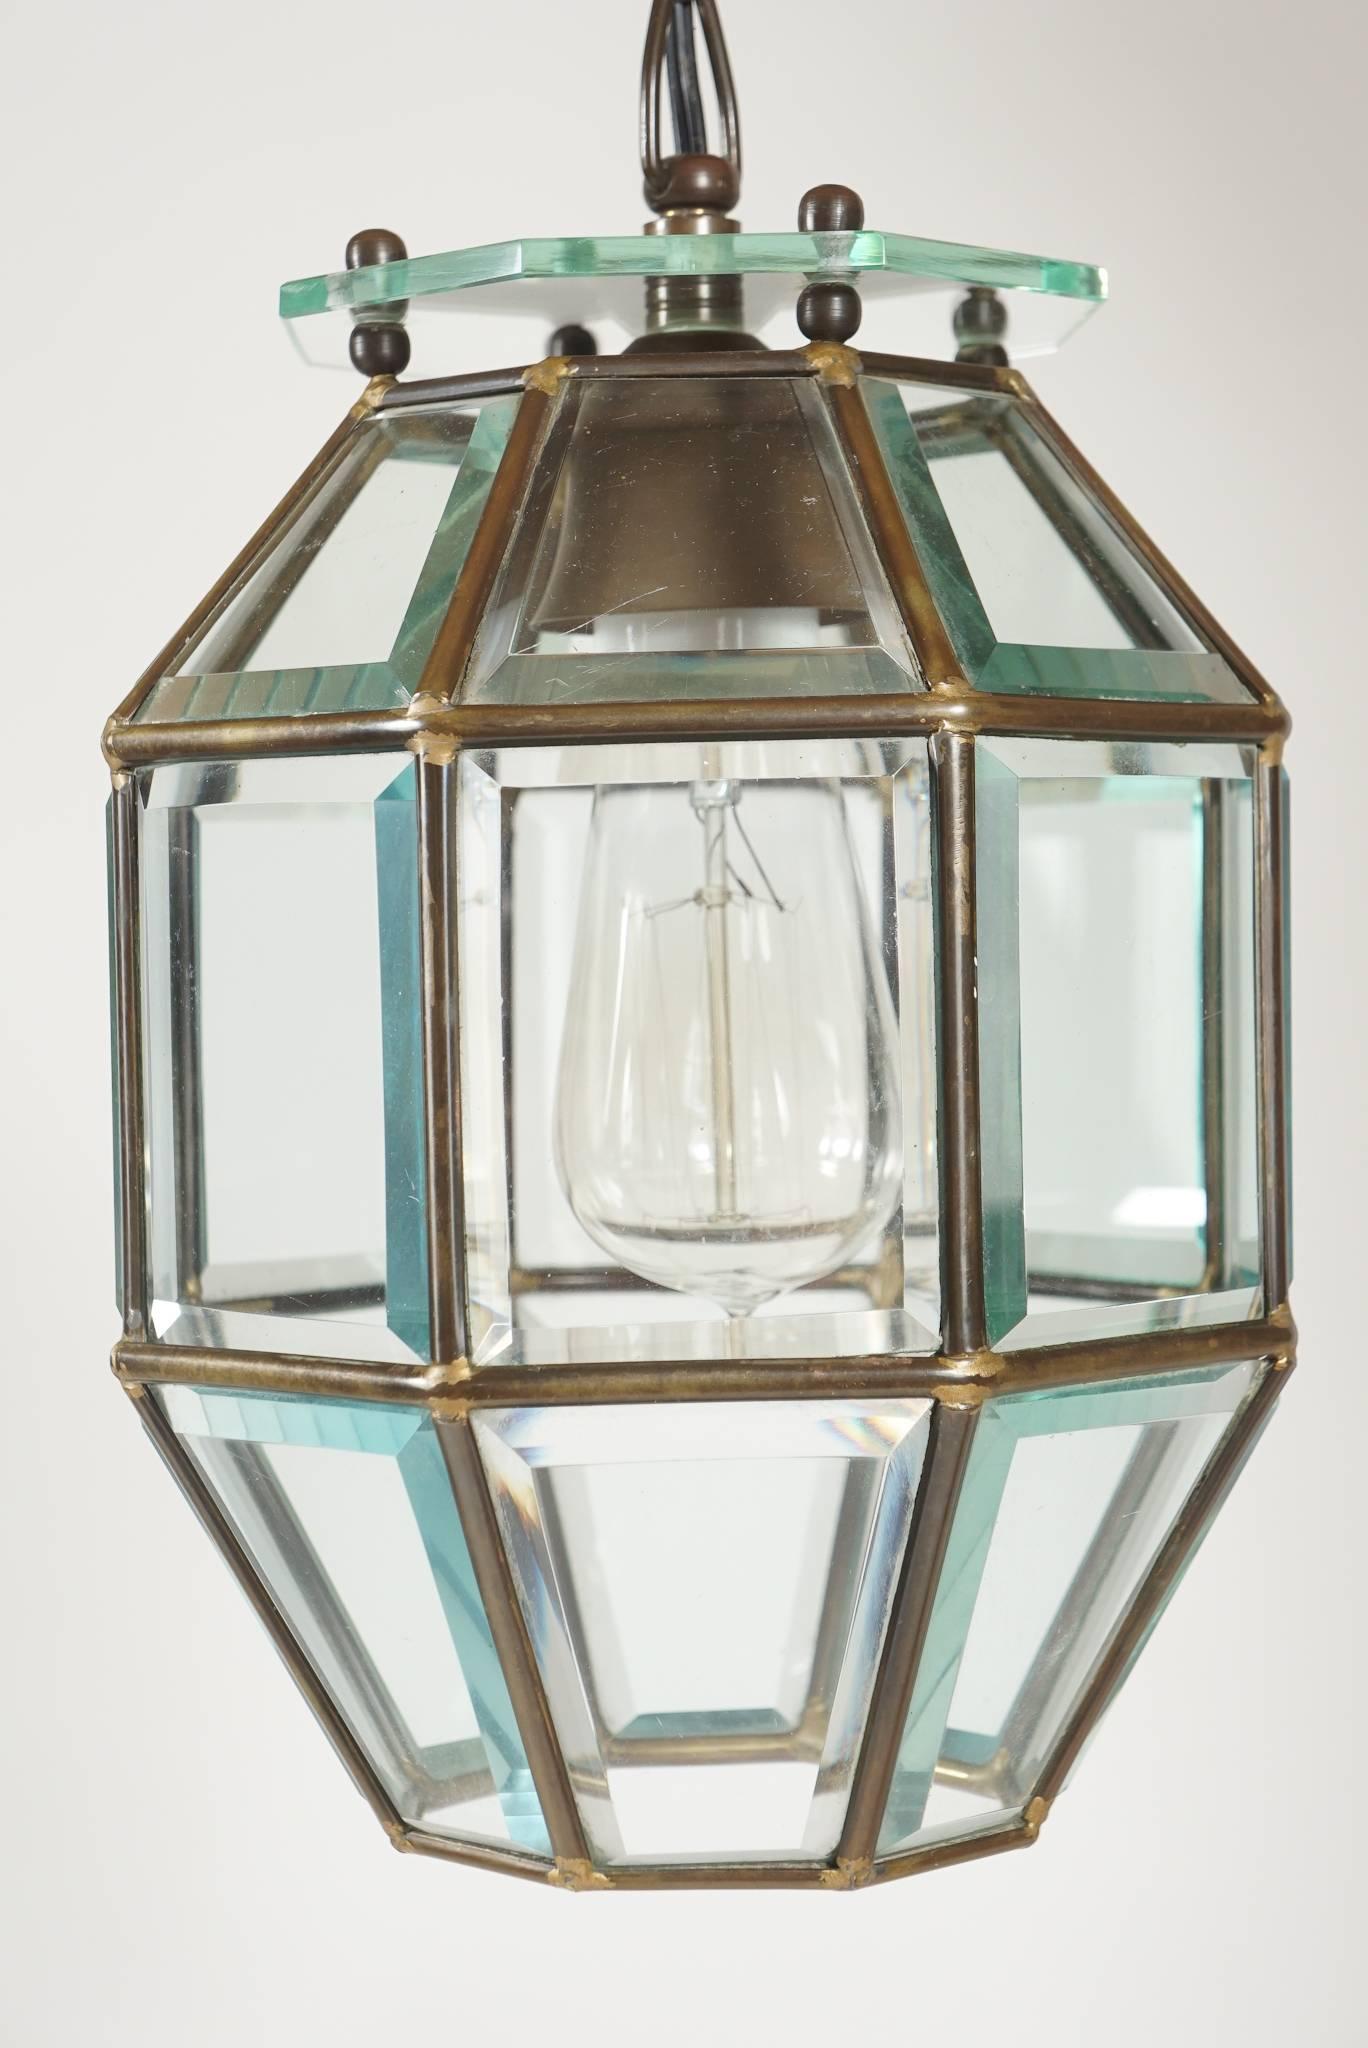 Vienna Secessionist (Sezession, Secessionsstil, or Jugendstil) period and style leaded and beveled glass pendant fixture attributed to Austro-Czech architect and designer Adolf Loos (1870 - 1933) of octagonal form having 24 beveled glass panels in